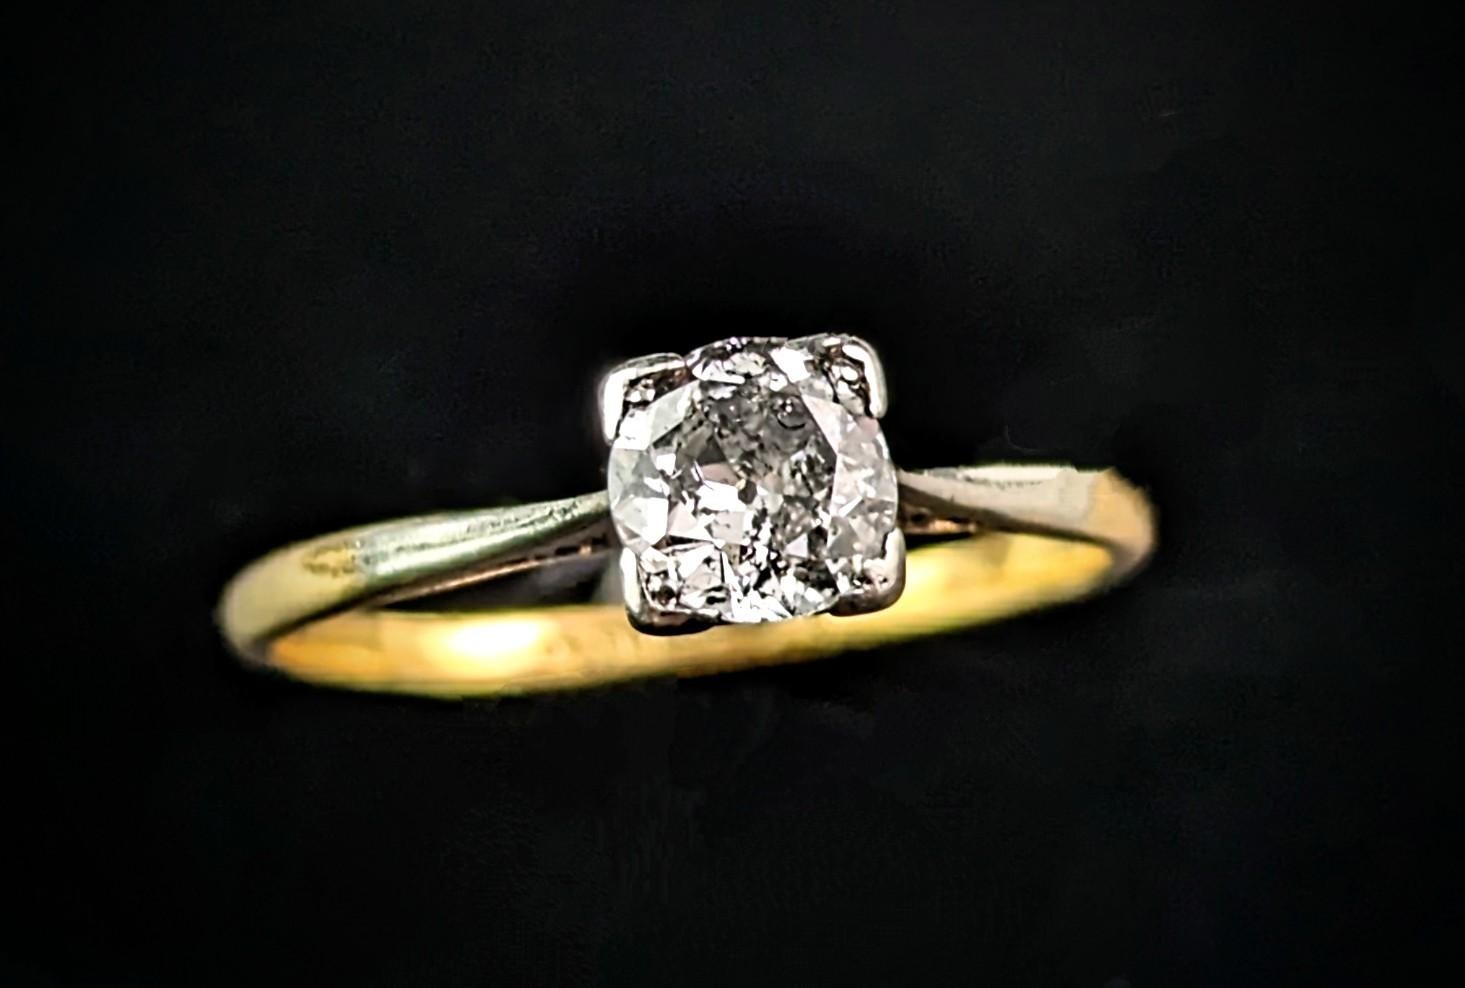 You cannot help but be enchanted by this superb Vintage Art Deco Diamond solitaire ring.

This beautiful piece is what engagement rings are all about, it is a wonderful, stunning vintage ring that ticks every box.

The solitaire also known as a